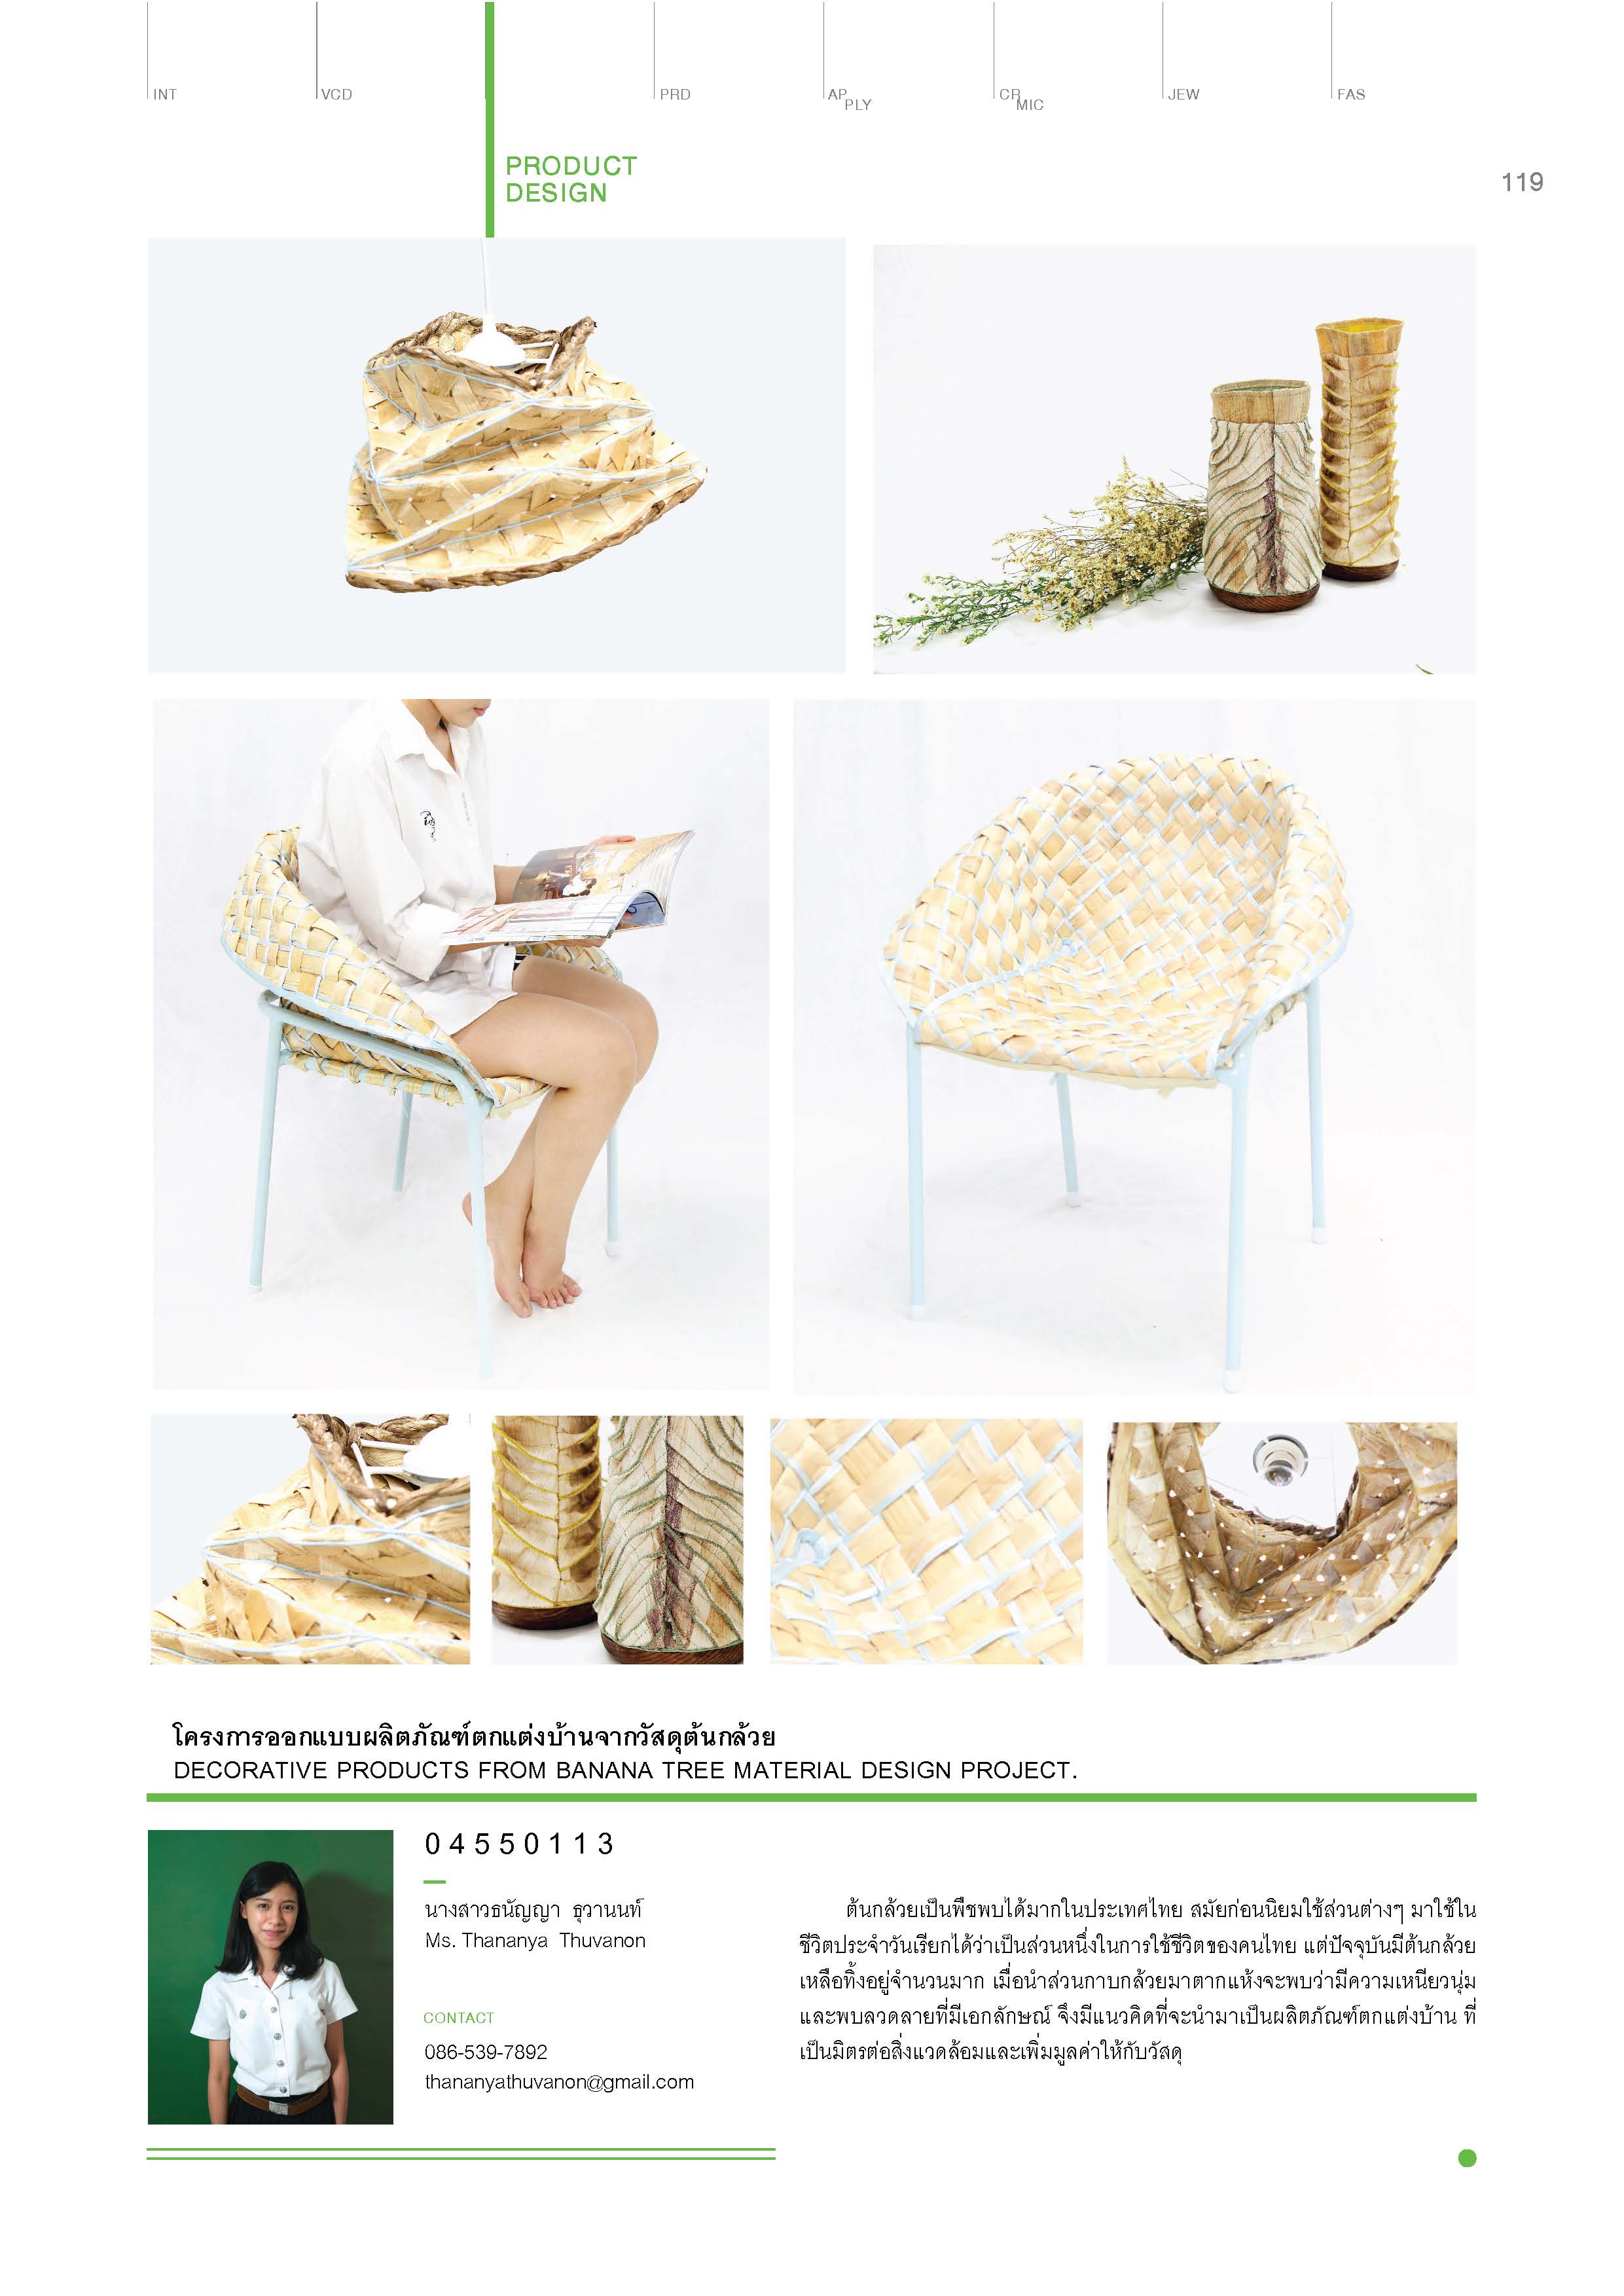 Photosynthesis-The46th_Art_Thesis_Exhibition_Decorative_Arts_Page_139